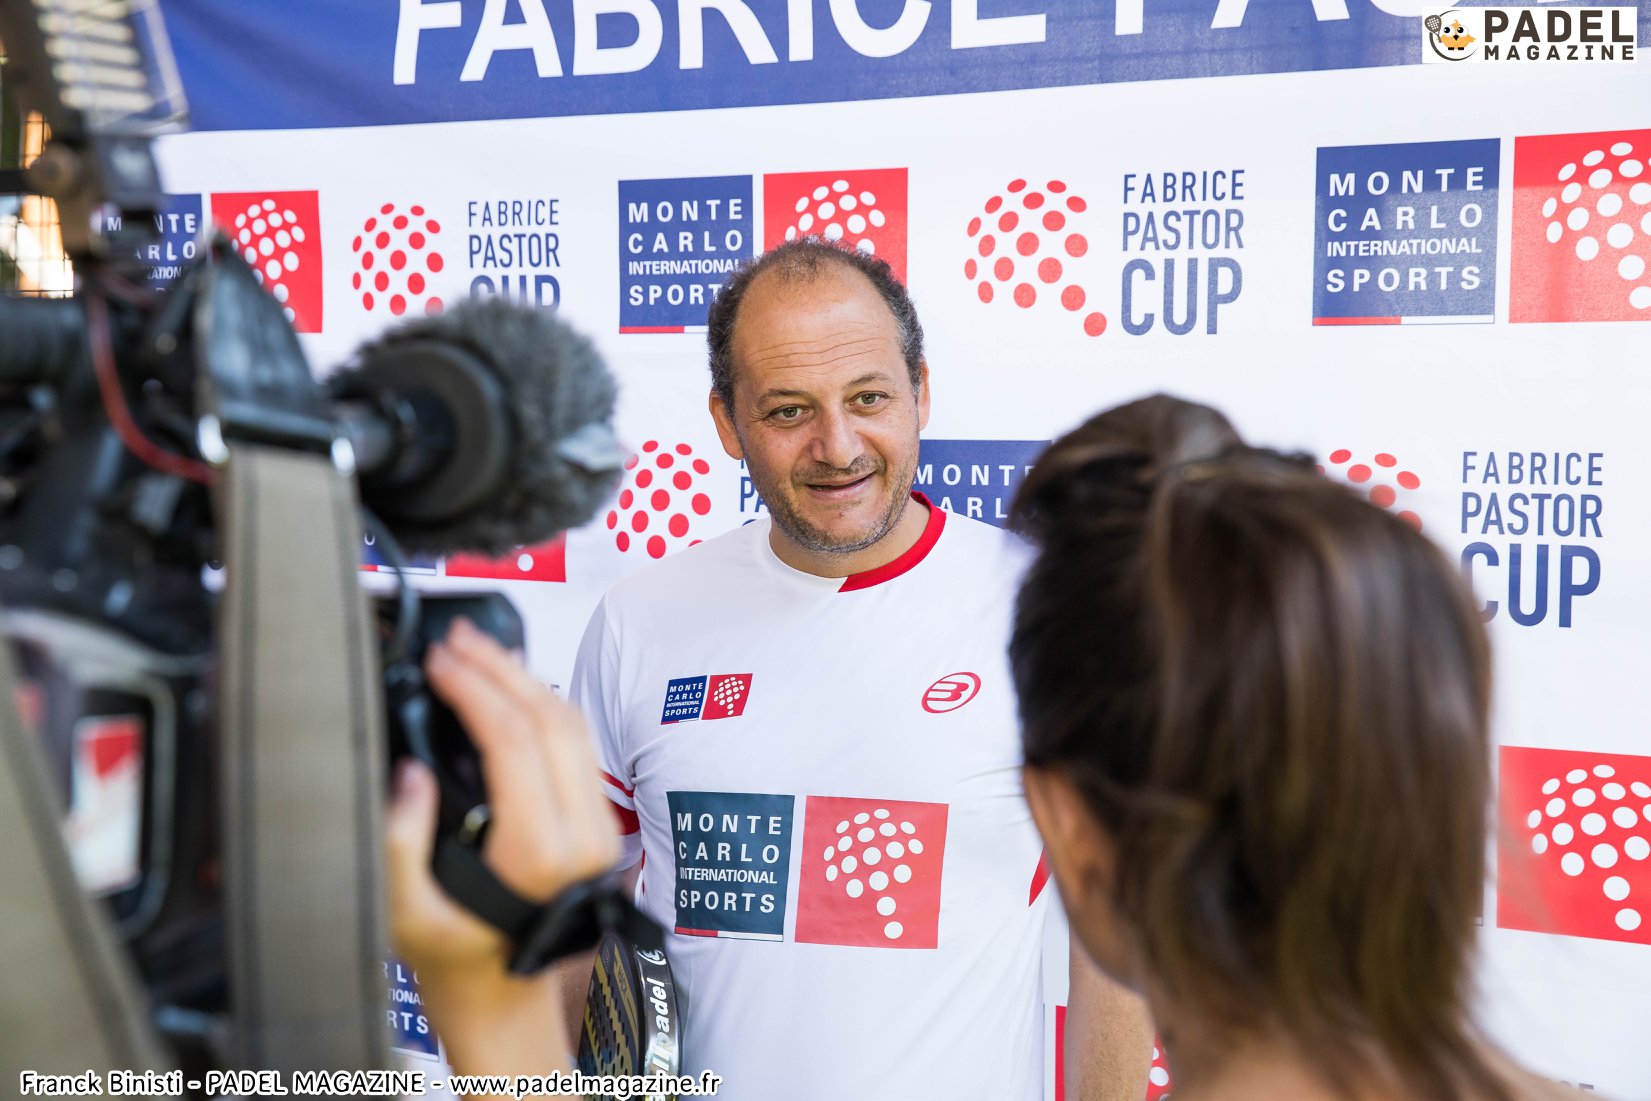 Fabrice pastor cup france